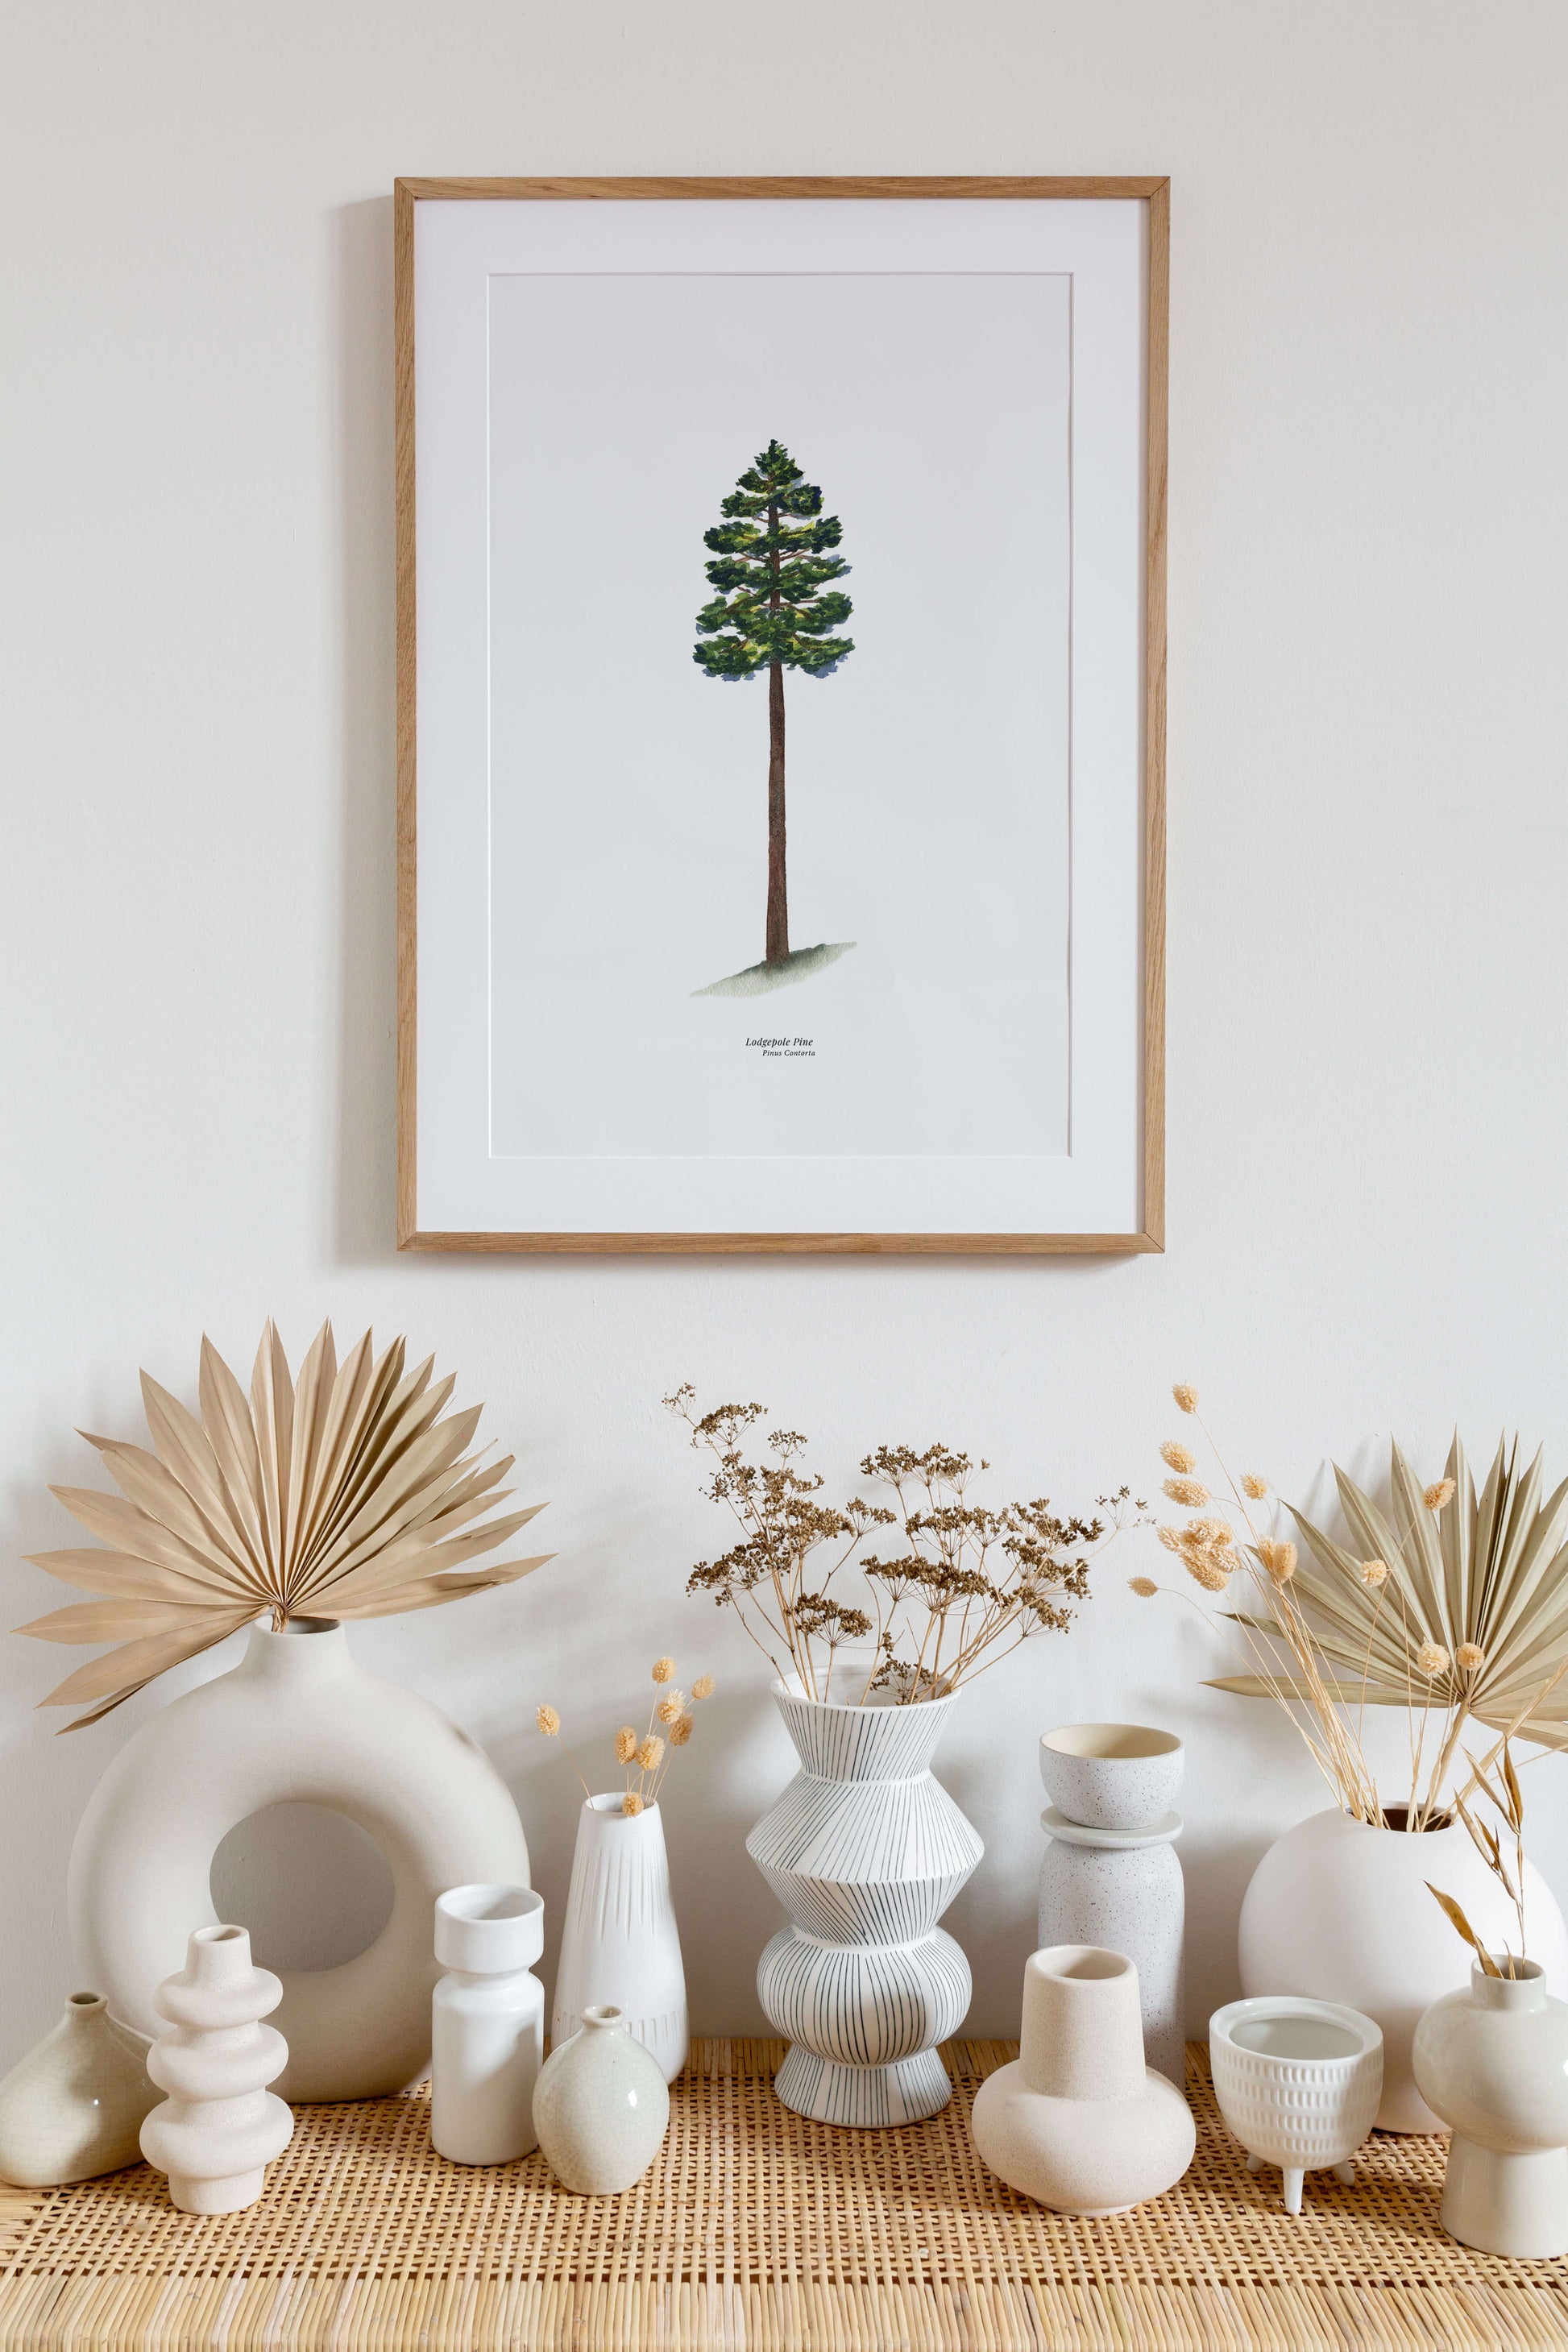 a picture of a pine tree on a white wall